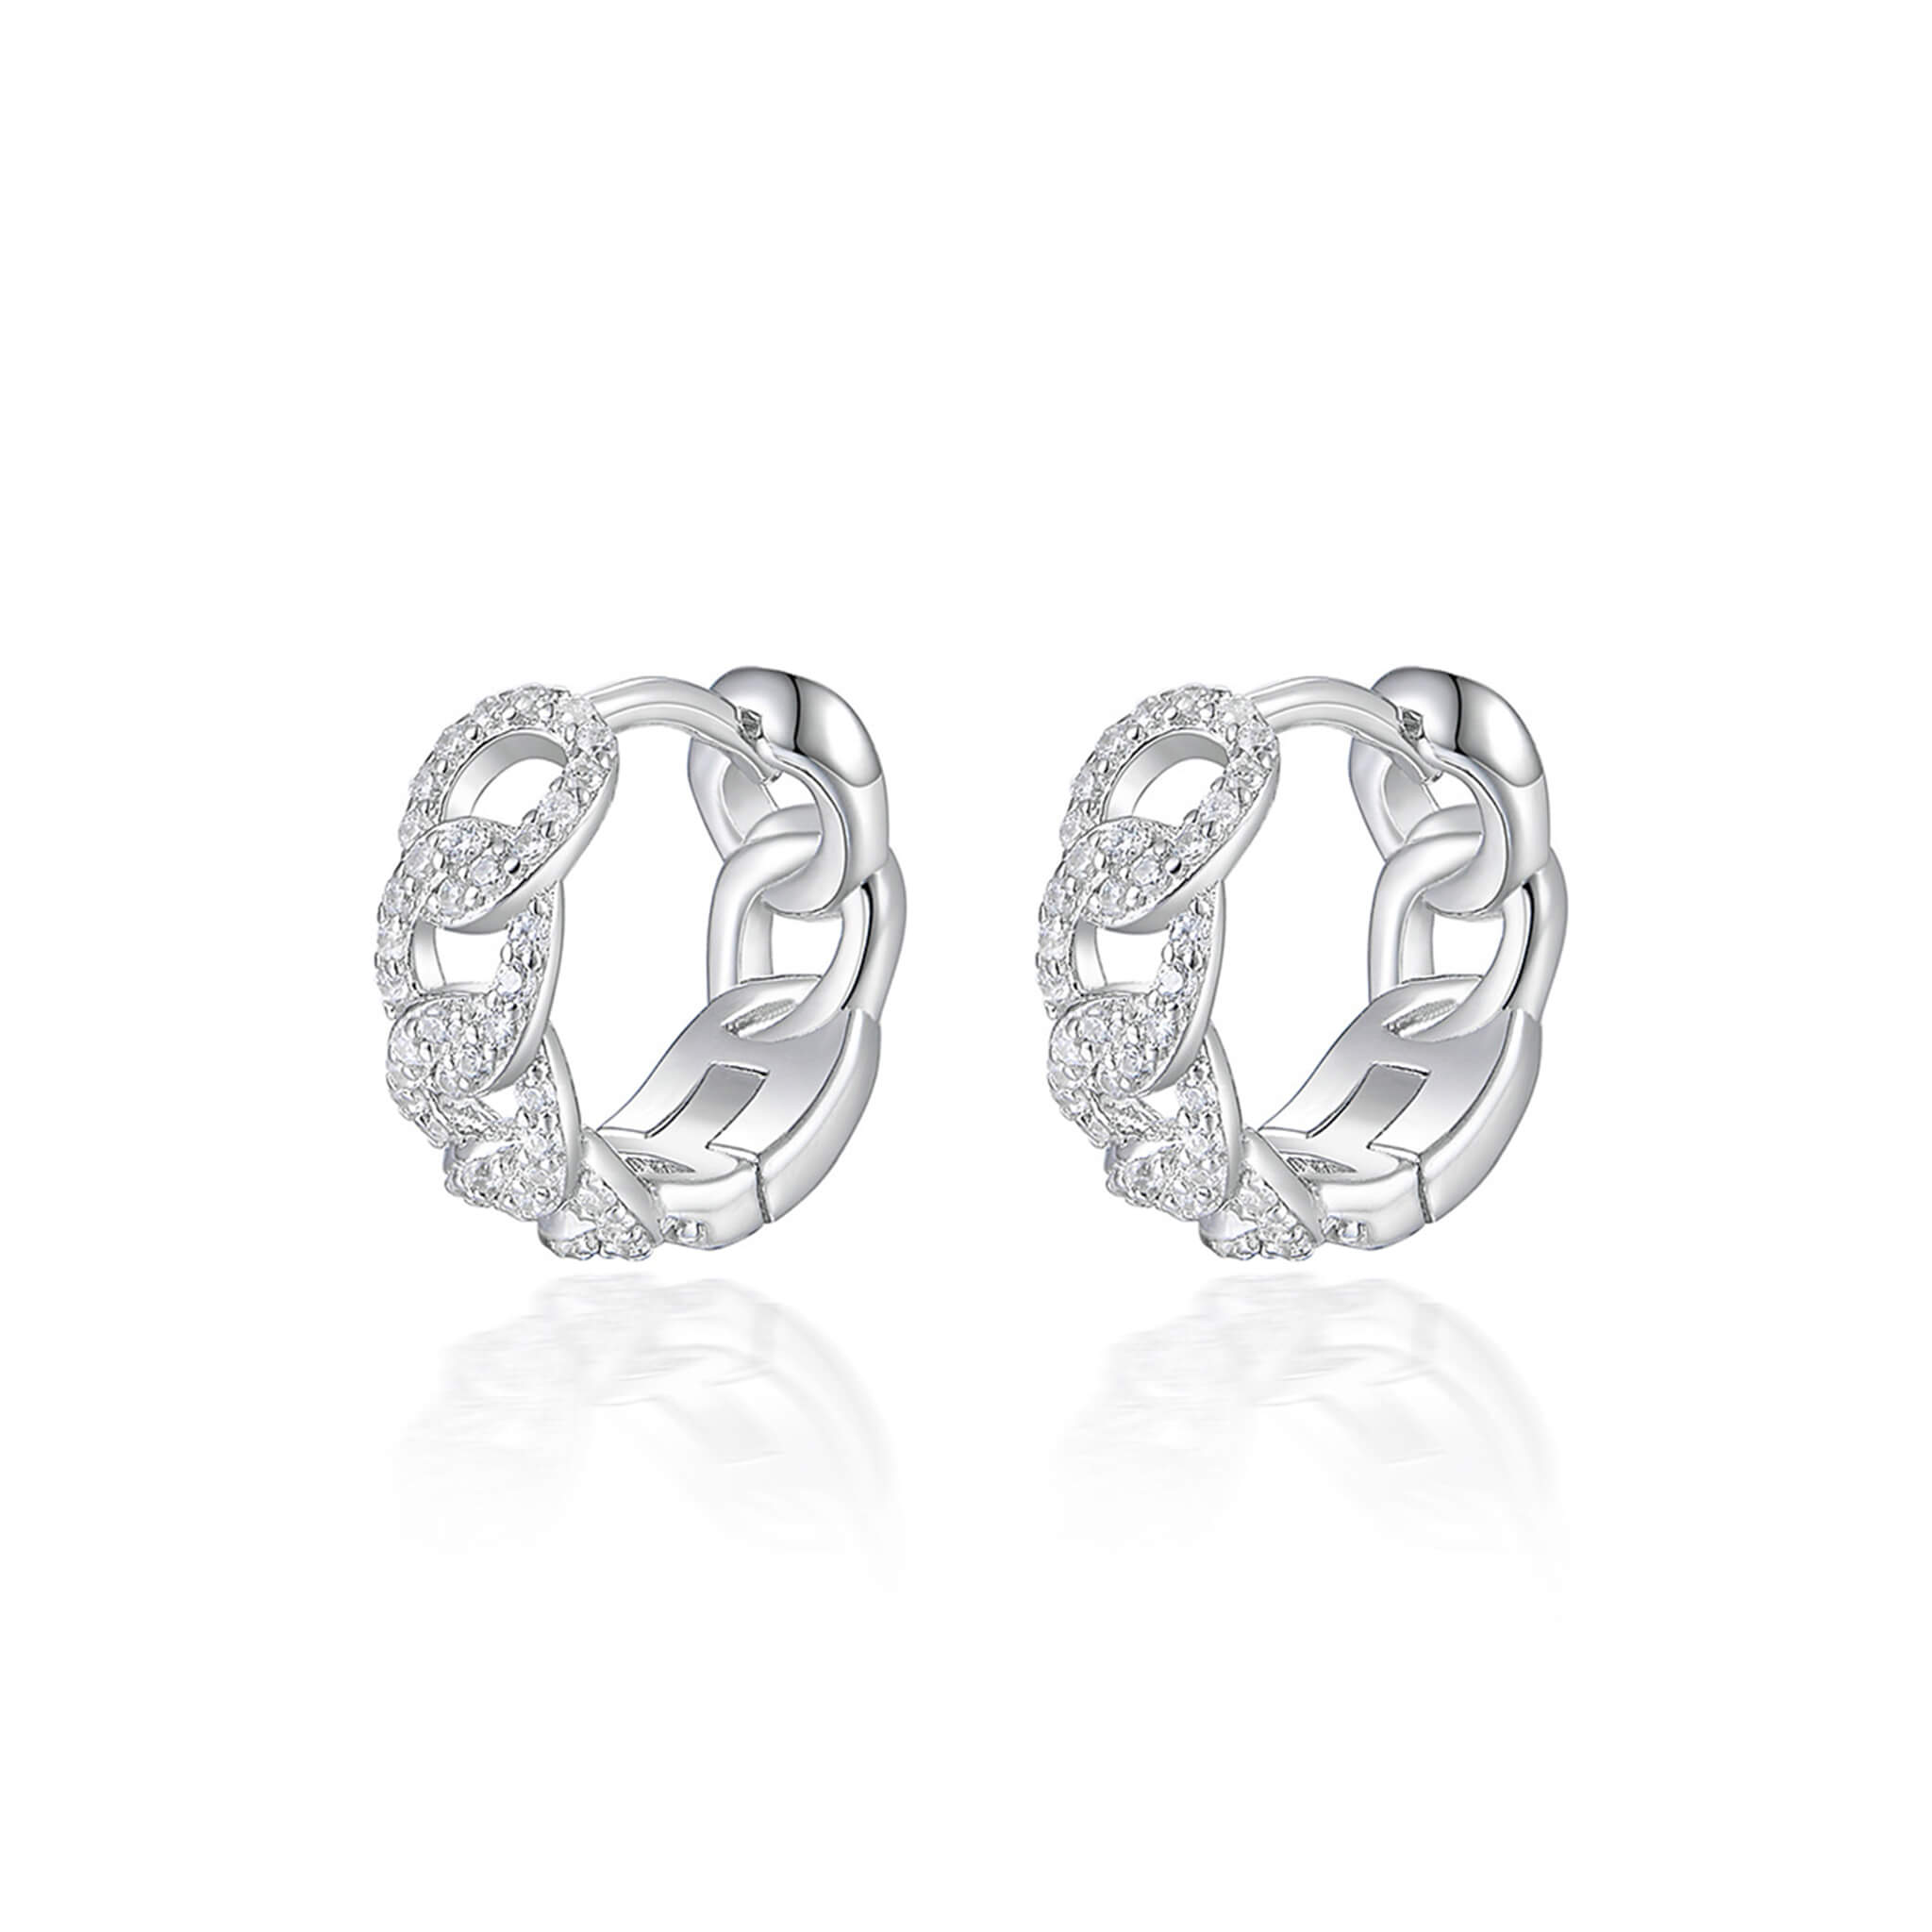 925 Silver Hollow Circle Earrings with Waterdrop Zircon Inlay - Versatile Halloween Accessory  UponBasics   